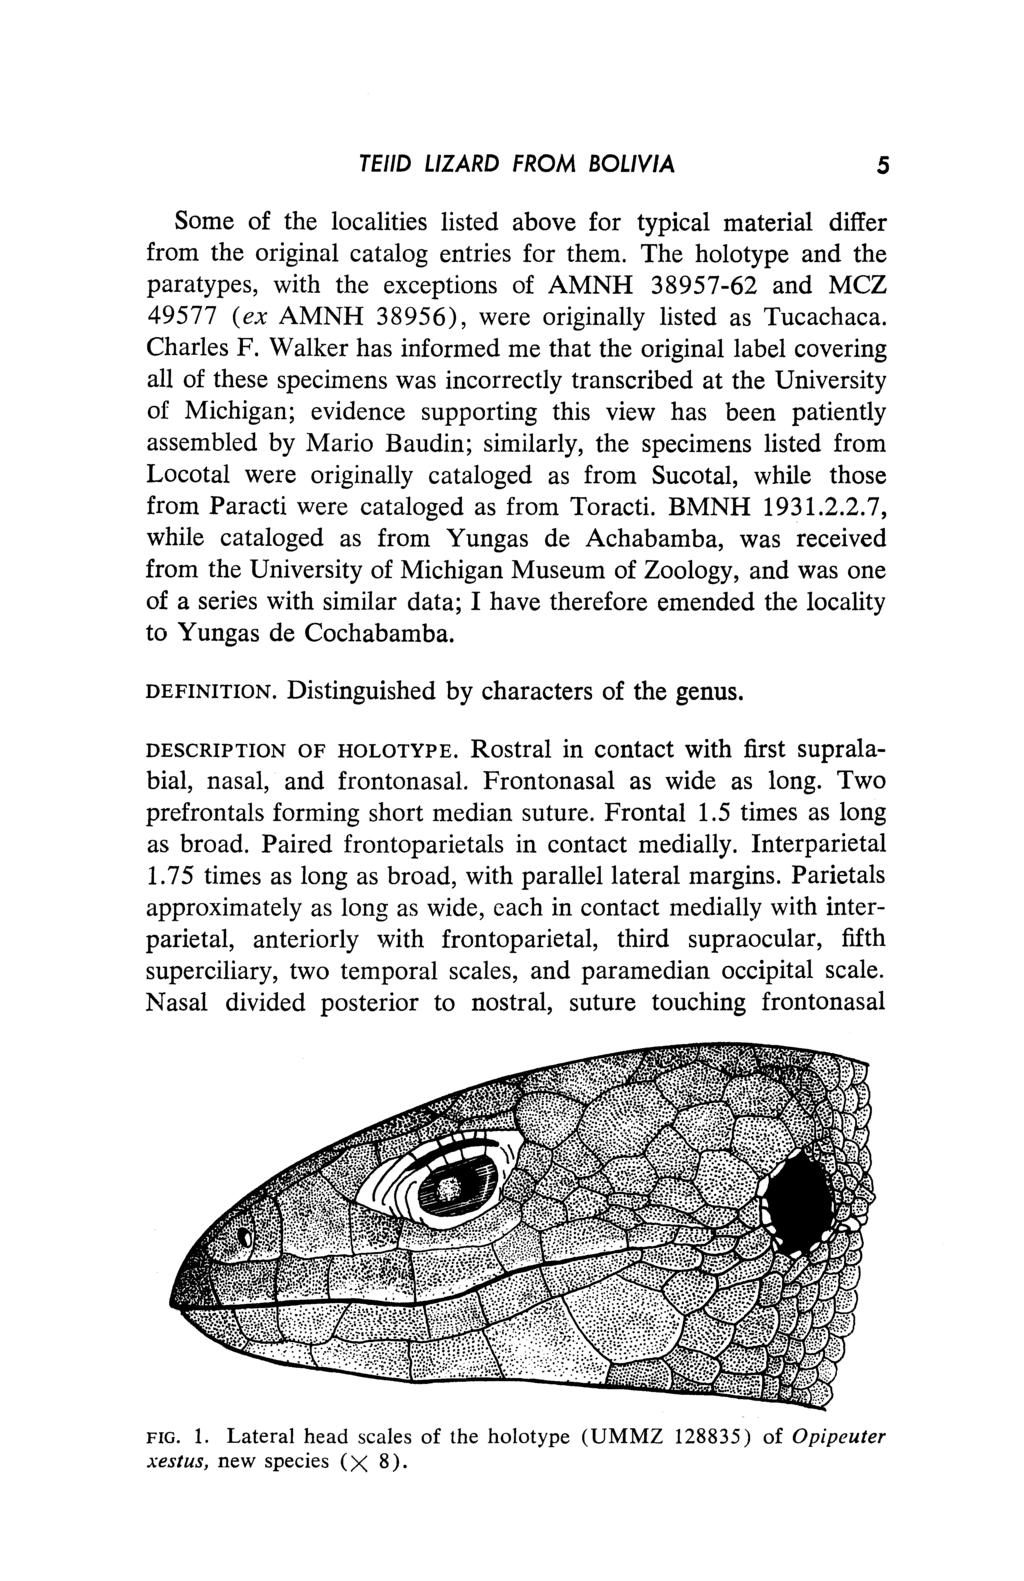 TEIID LIZARD FROM BOLIVIA 5 Some of the localities listed above for typical material differ from the original catalog entries for them.